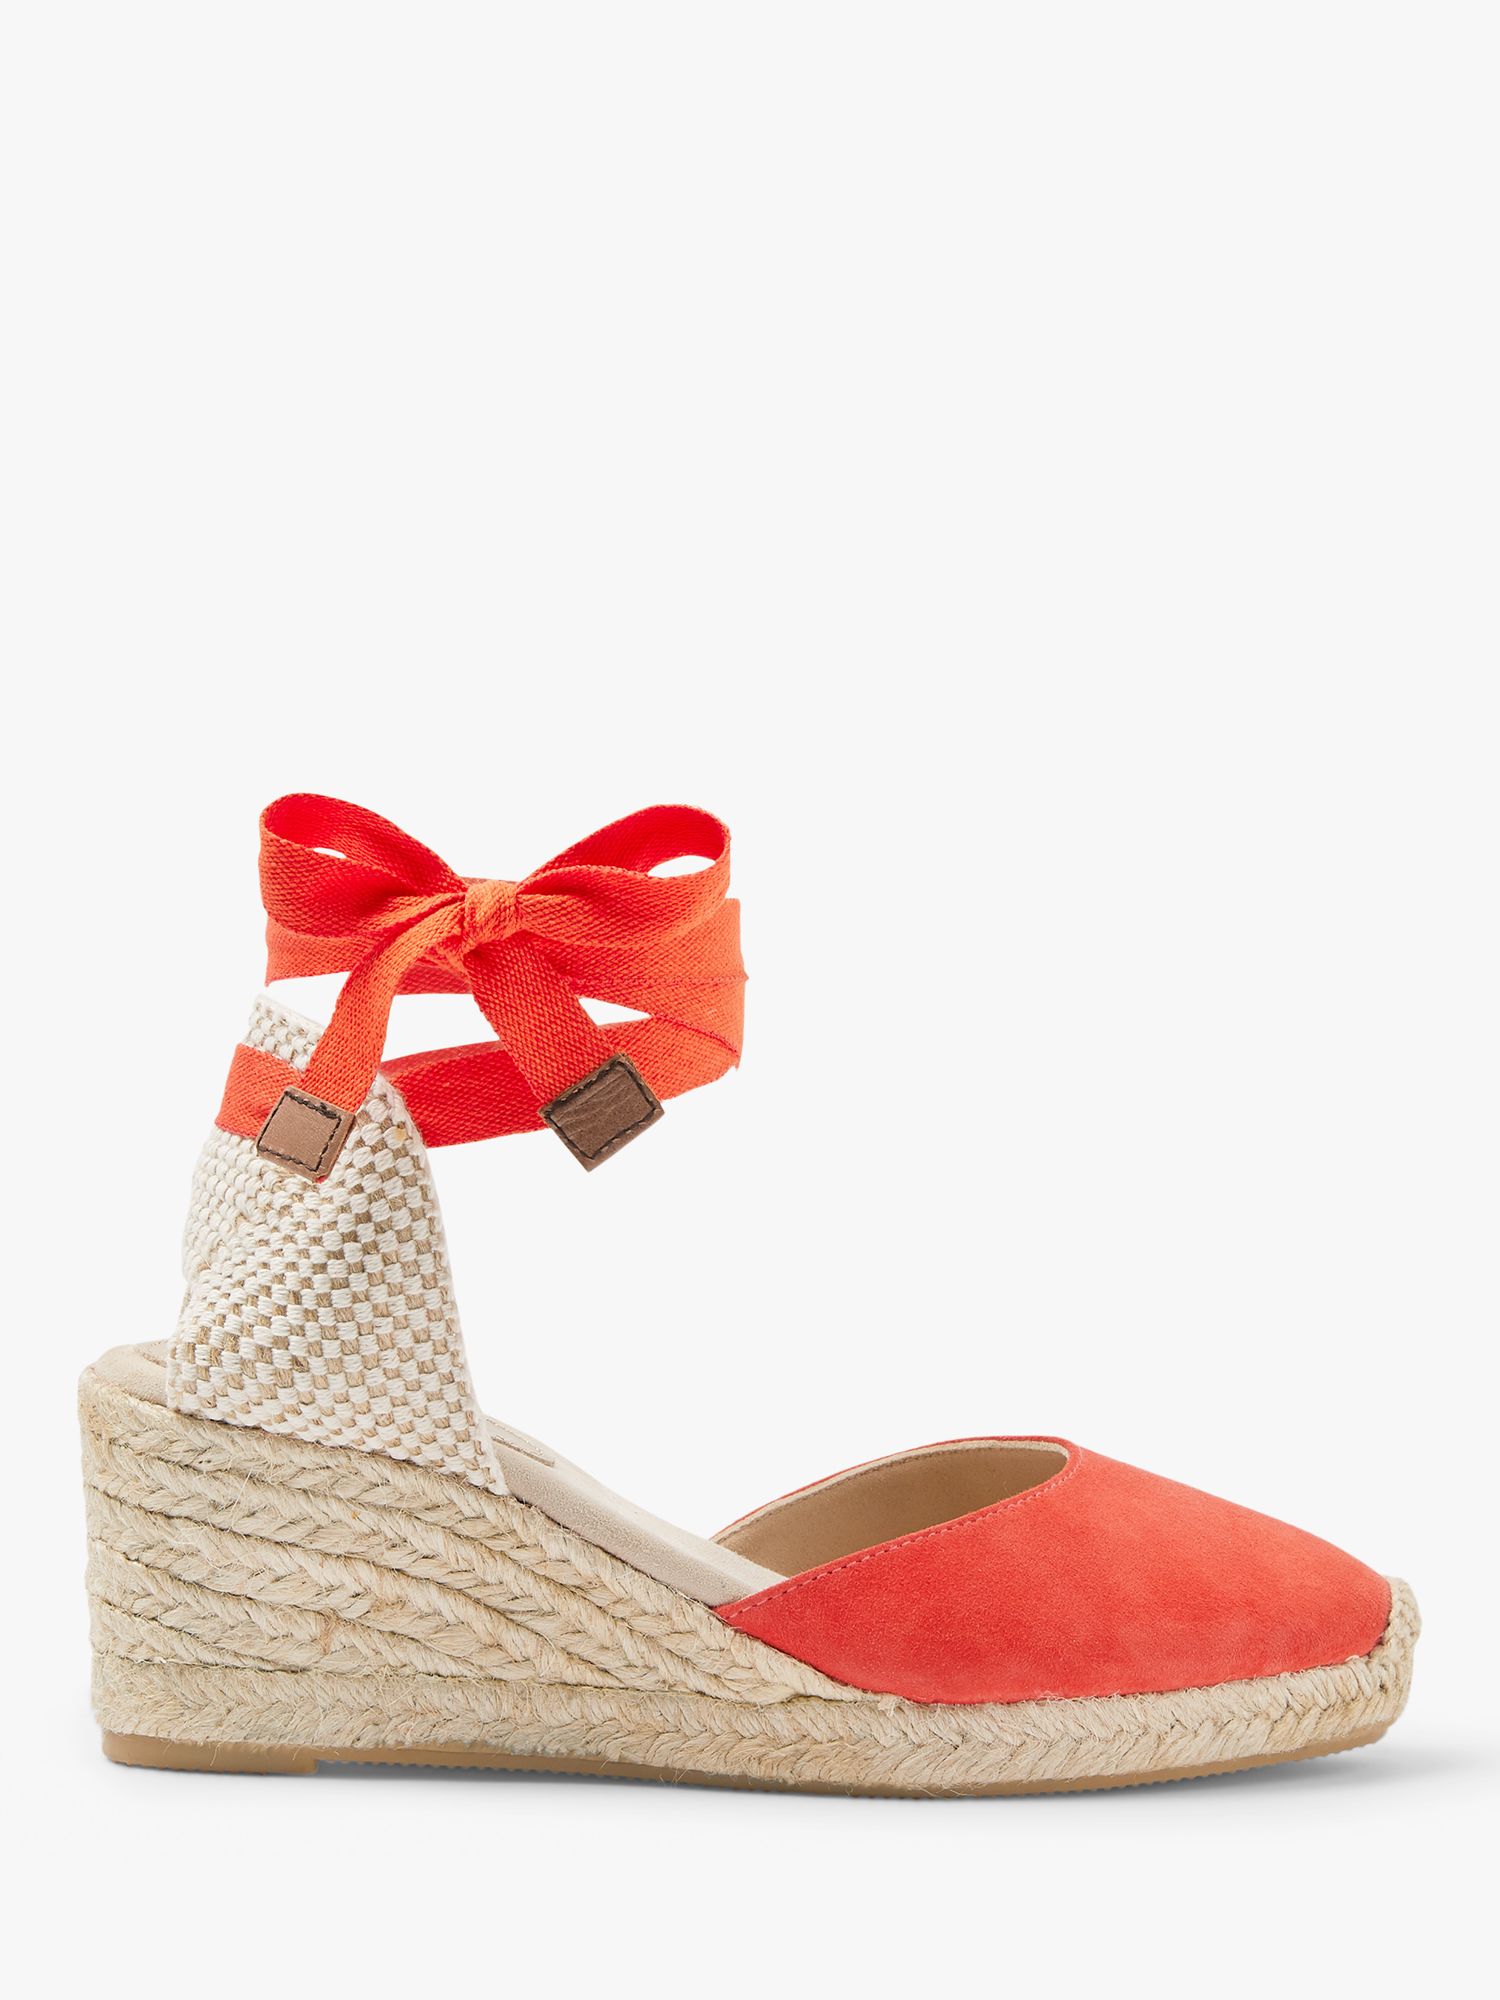 Boden Cassie Espadrille Wedges, Cherry Red at John Lewis & Partners